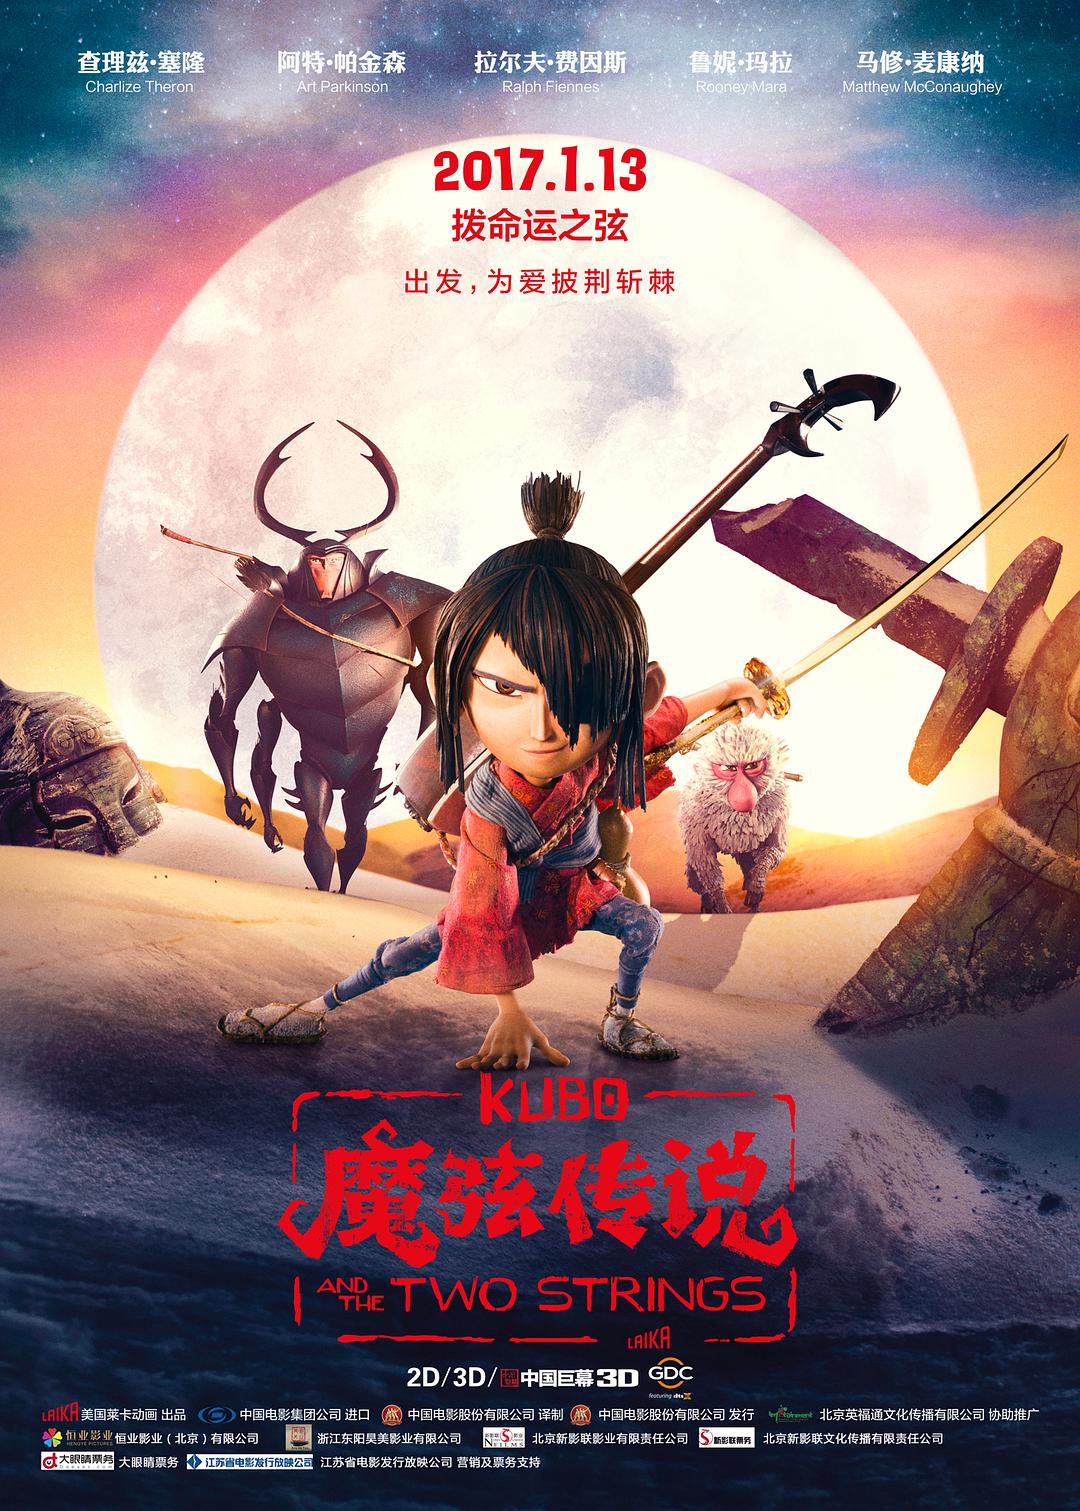 ħҴ˵/ñ Kubo.And.The.Two.Strings.2016.1080p.BluRay.x264.DTS-HD.MA.5.1-FGT 7.-1.png